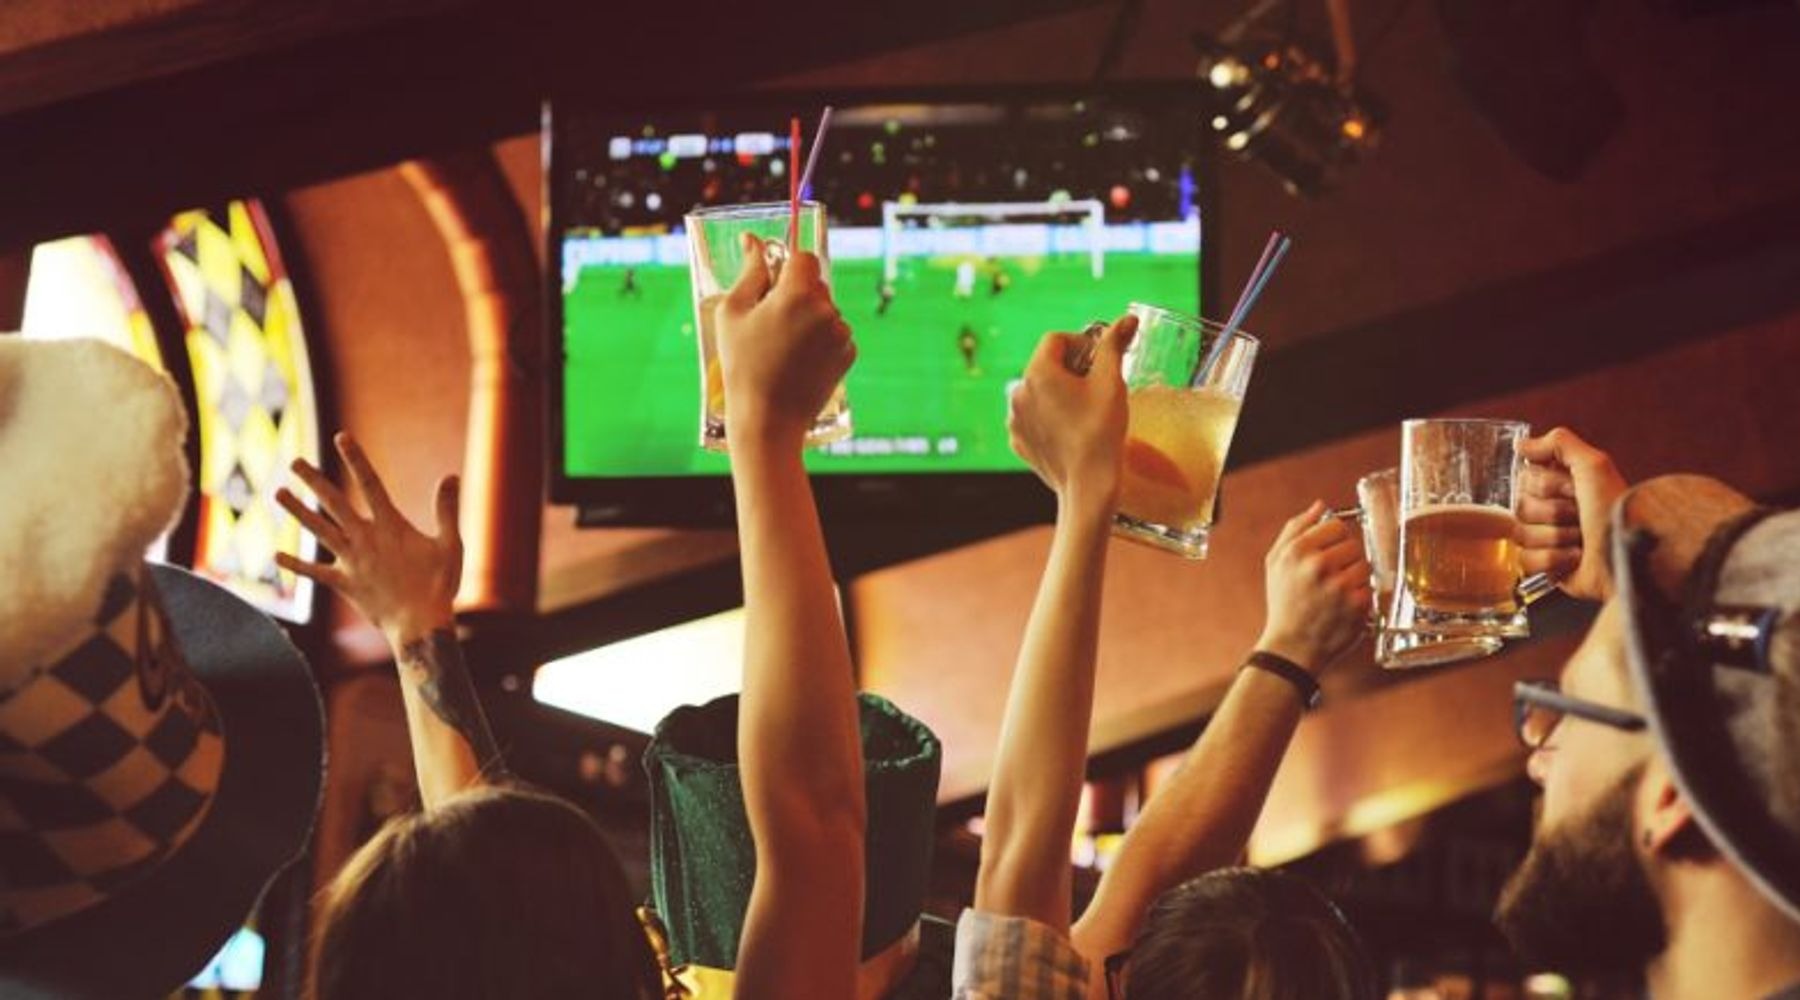 Check out Cafe Football Singapore, a fun place to hang out to watch fo